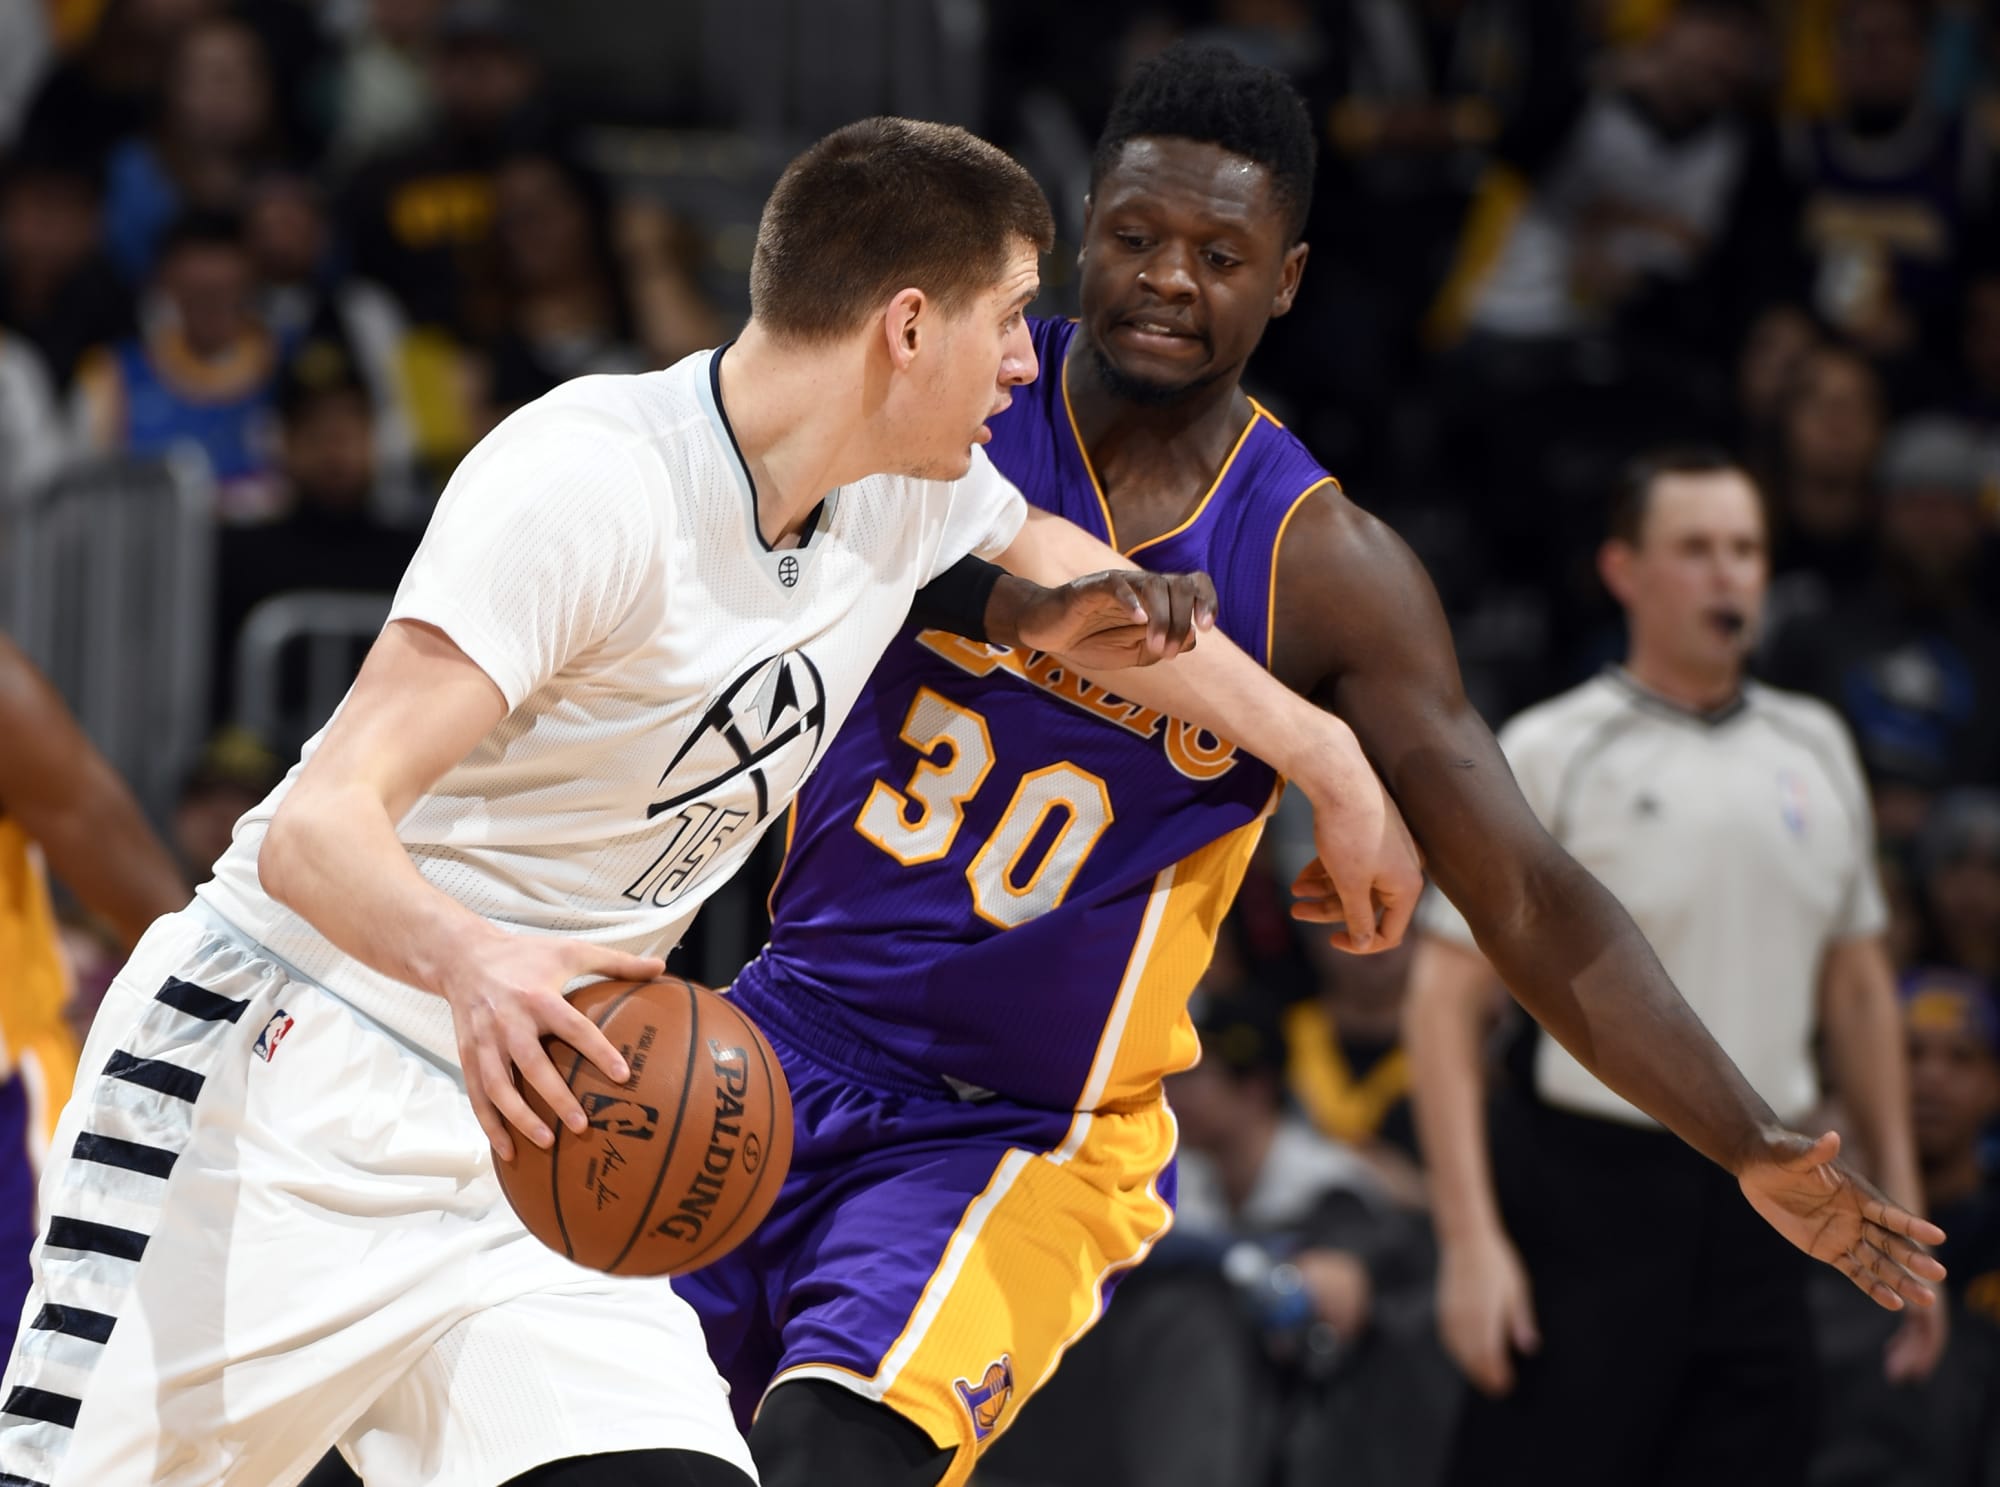 Los Angeles Lakers training camp and preseason dates to know